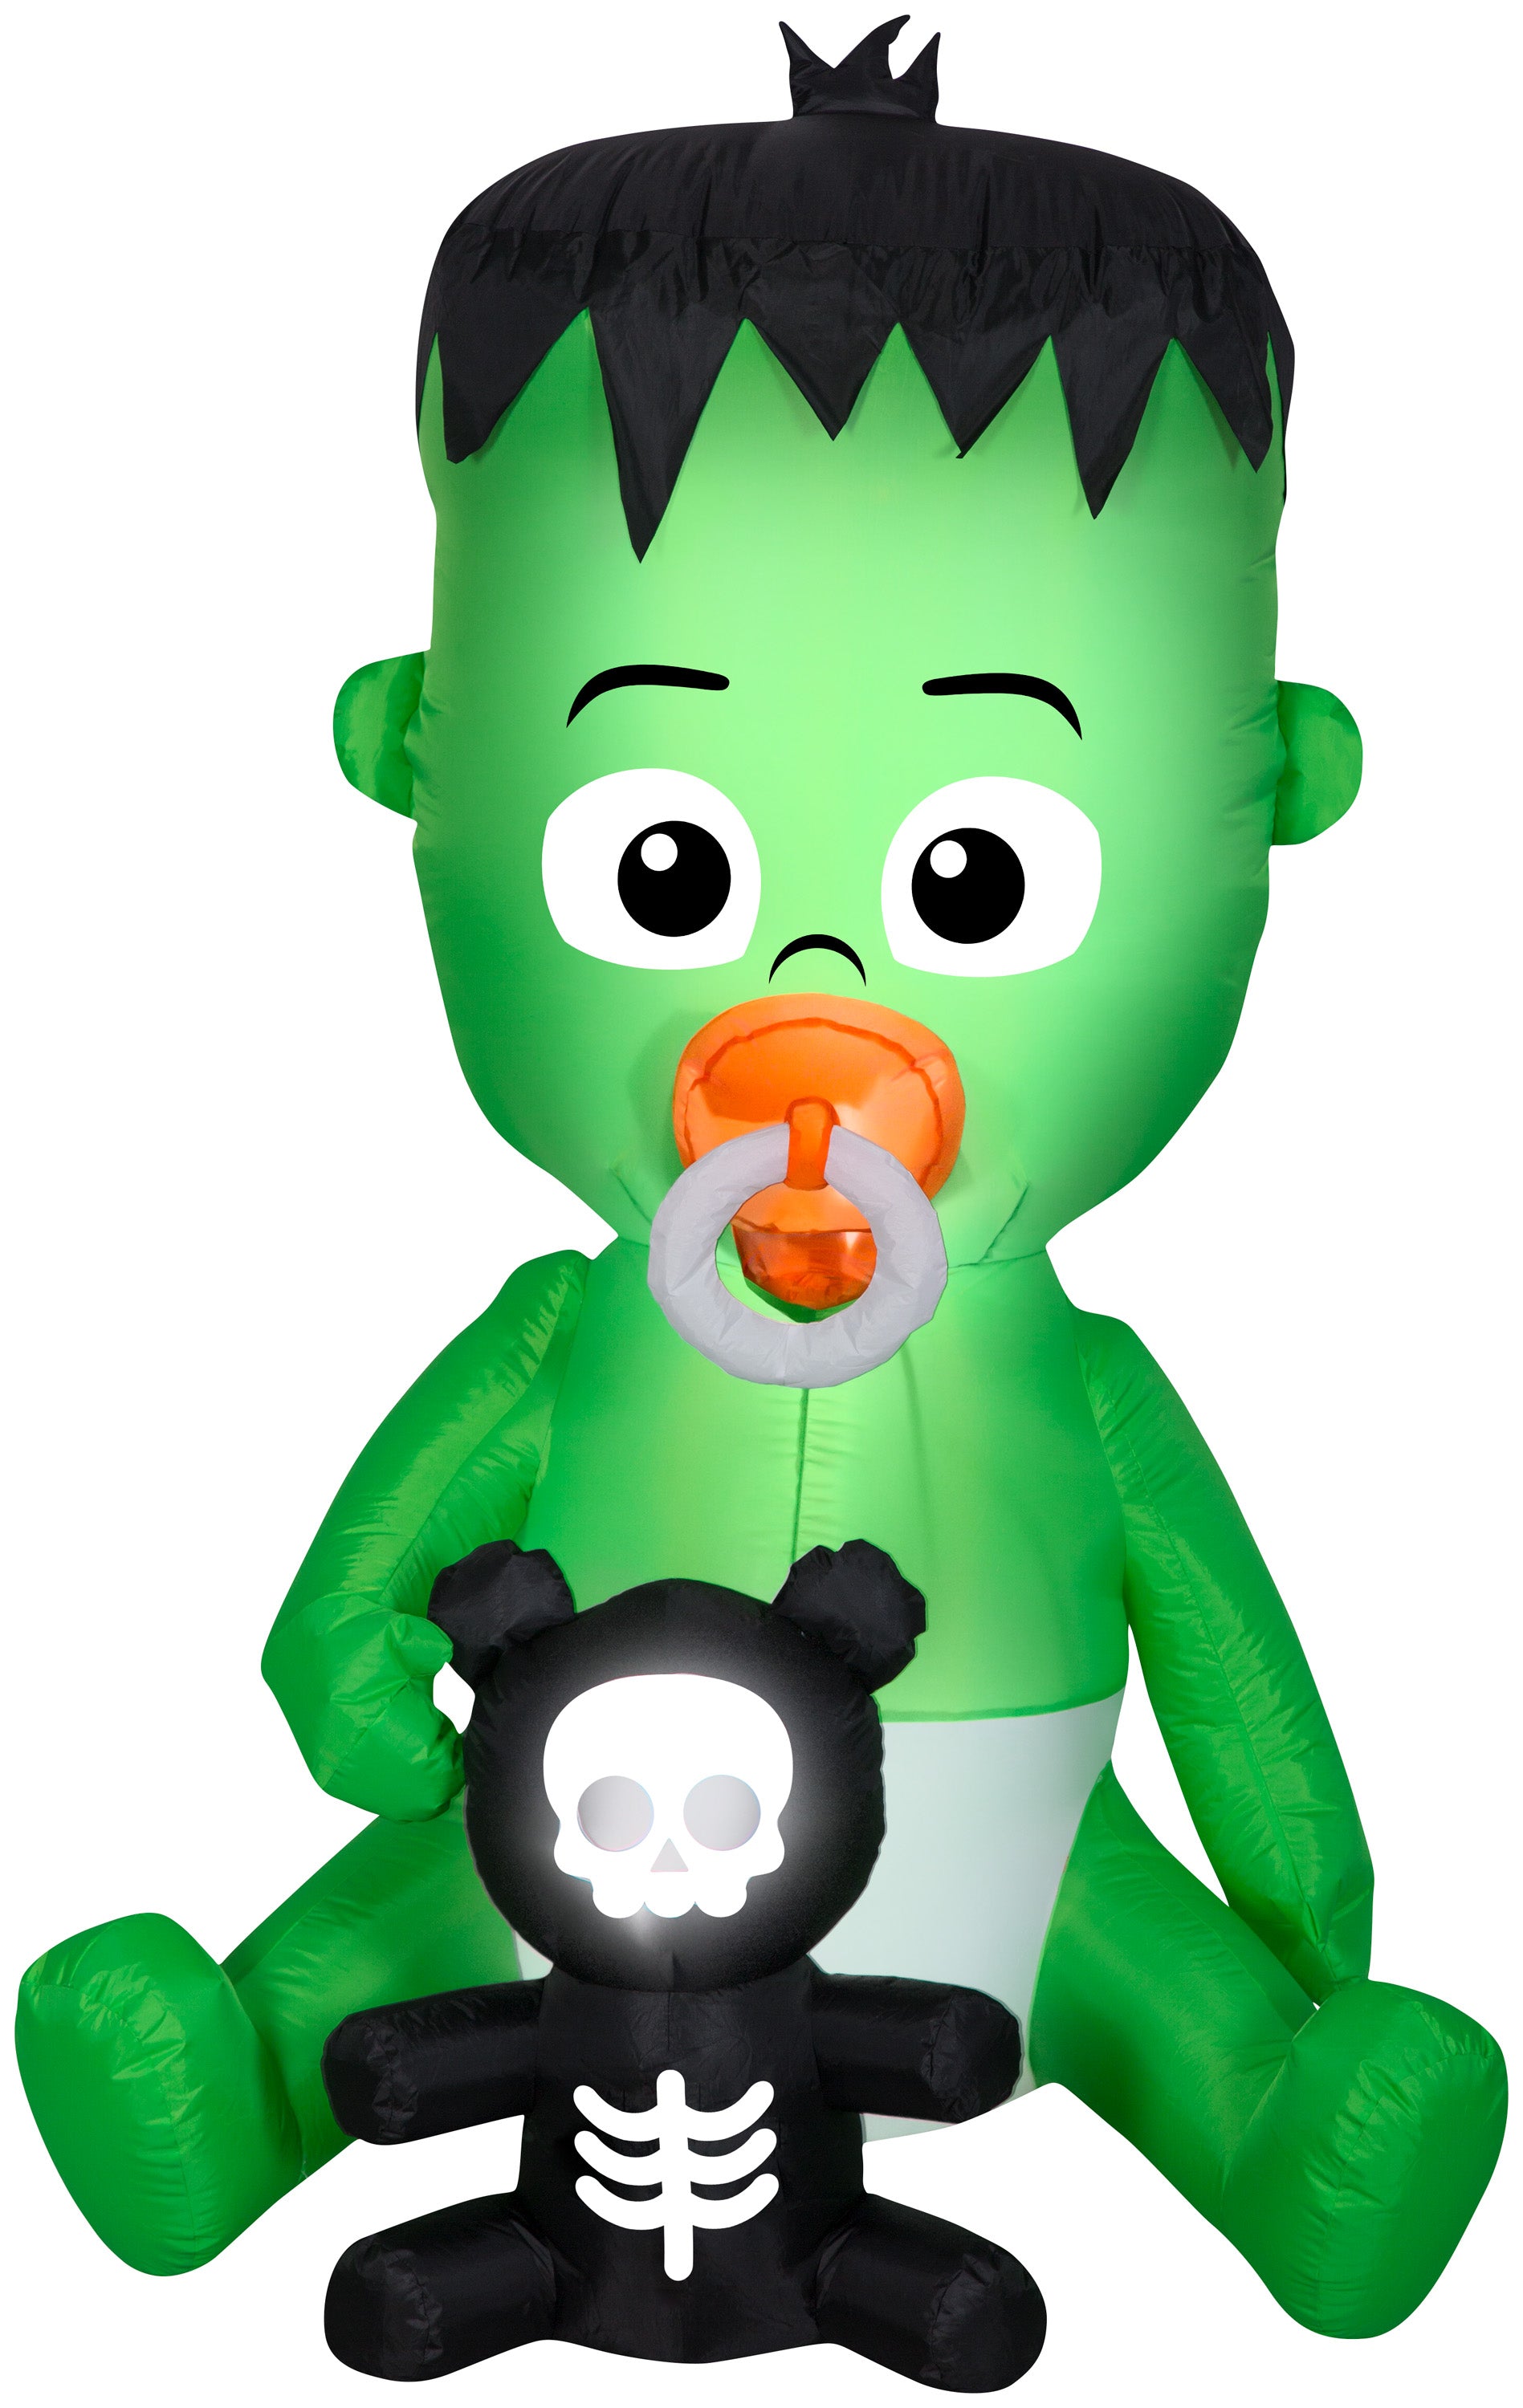 Gemmy Animated Airblown Nom Nom Baby w/Pacifier, 5.5 ft Tall, green